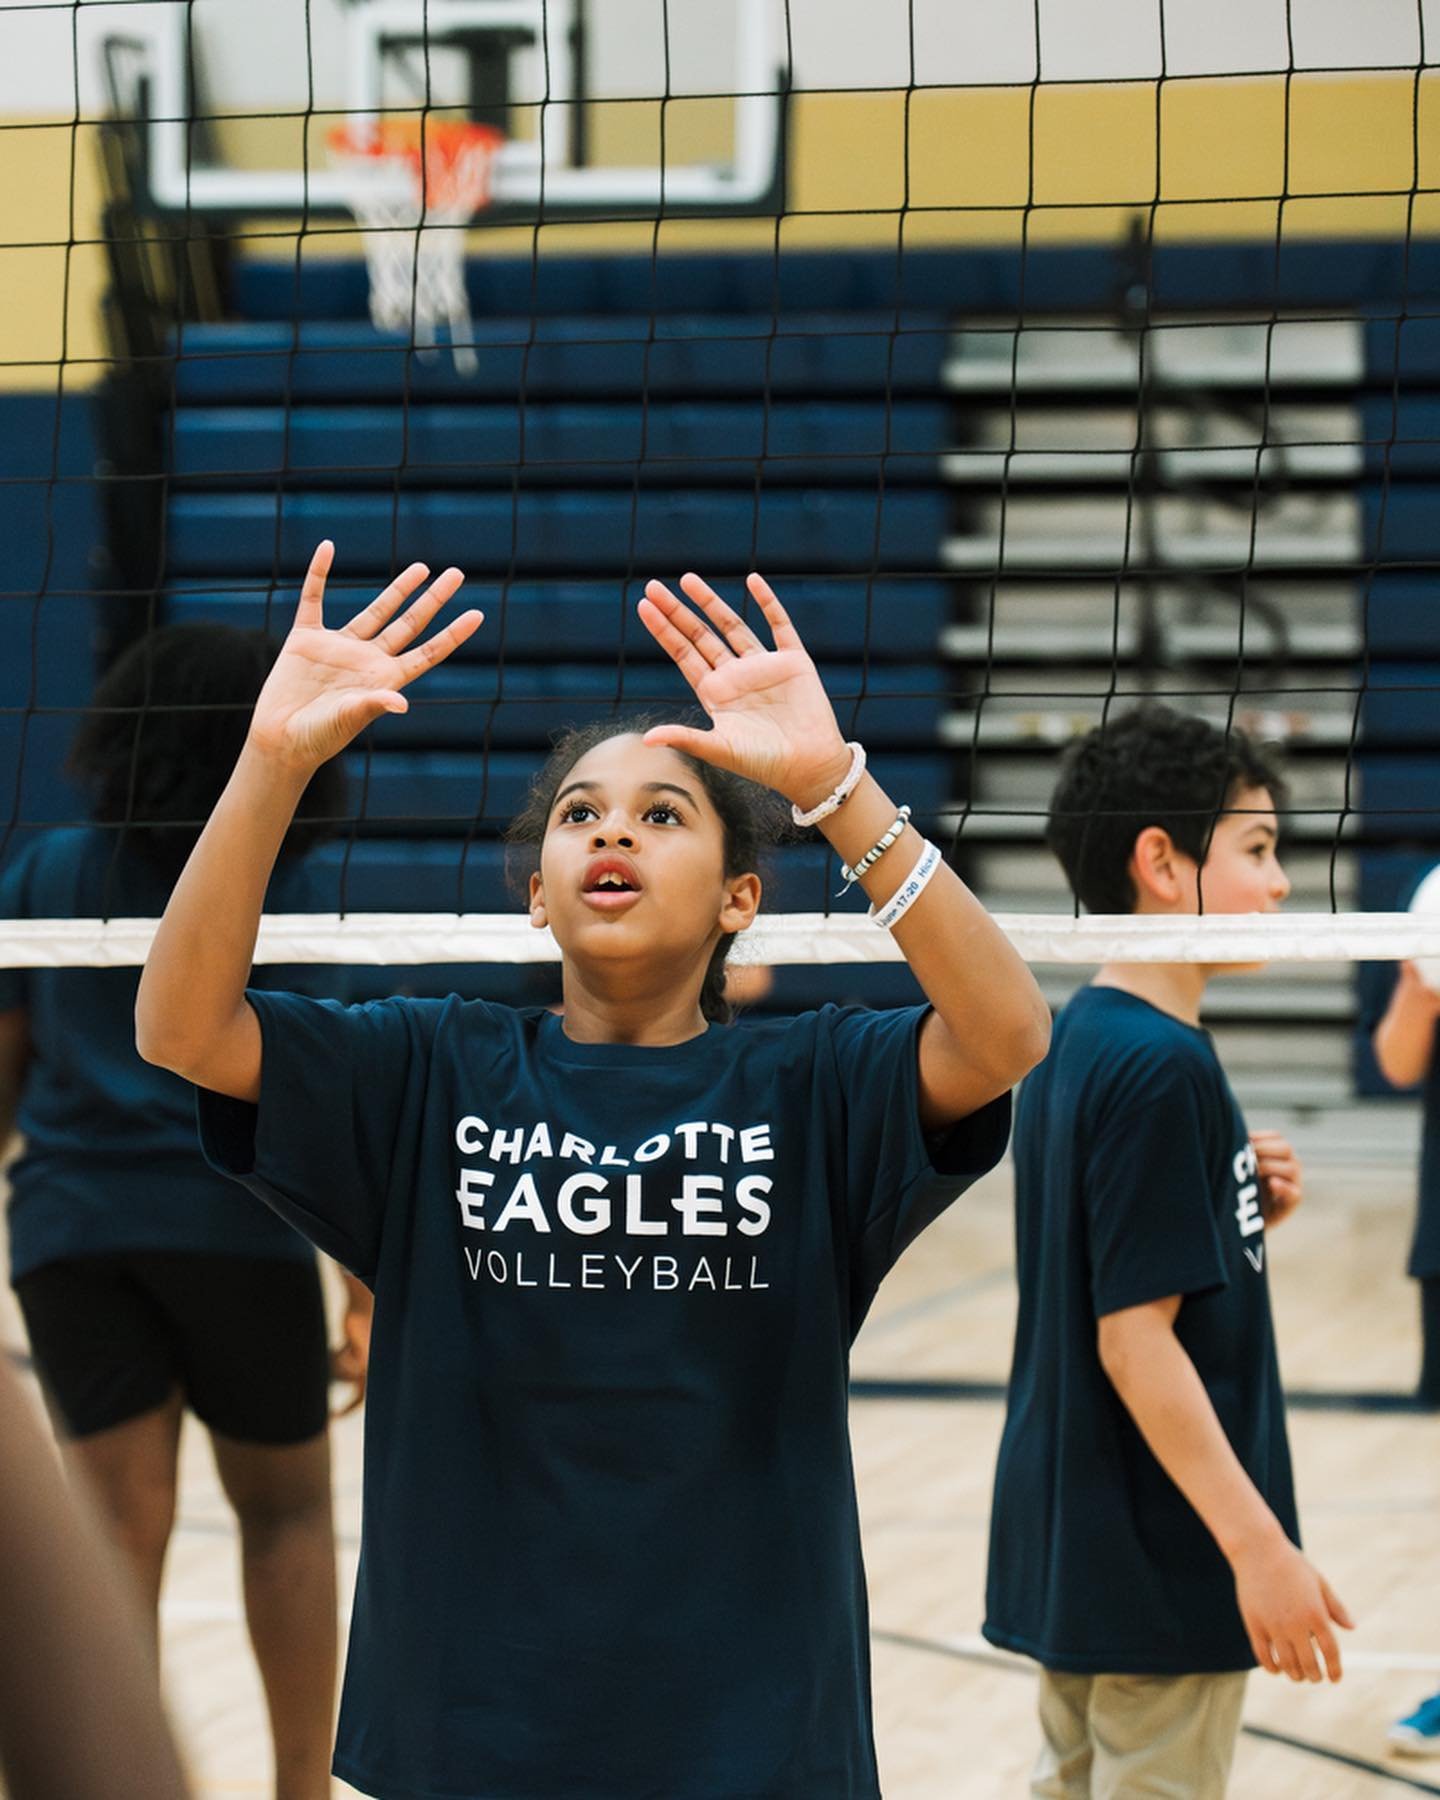 This week, we finish up our last of eight volleyball clinics this spring! 🏐 
During the last week at Hickory Grove School, we had a blast learning new skills, playing games, and talking about the word of the day, service. We got to talk about the ul